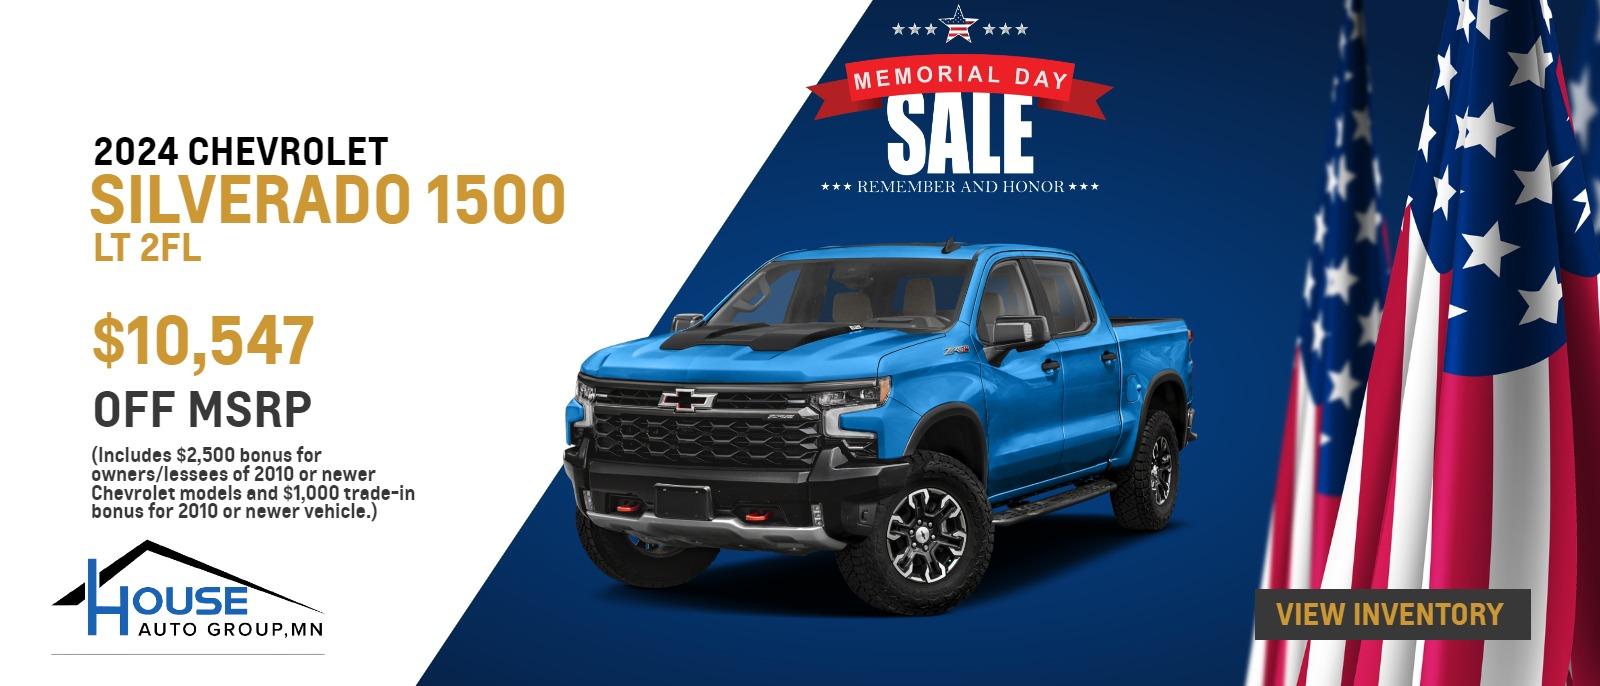 2024 Silverado 1500 LT 2FL Trucks - $10,547 Off MSRP! (Includes $2,500 bonus for owners/lessees of 2010 or newer Chevrolet models and $1,000 trade-in bonus for 2010 or newer vehicle.)